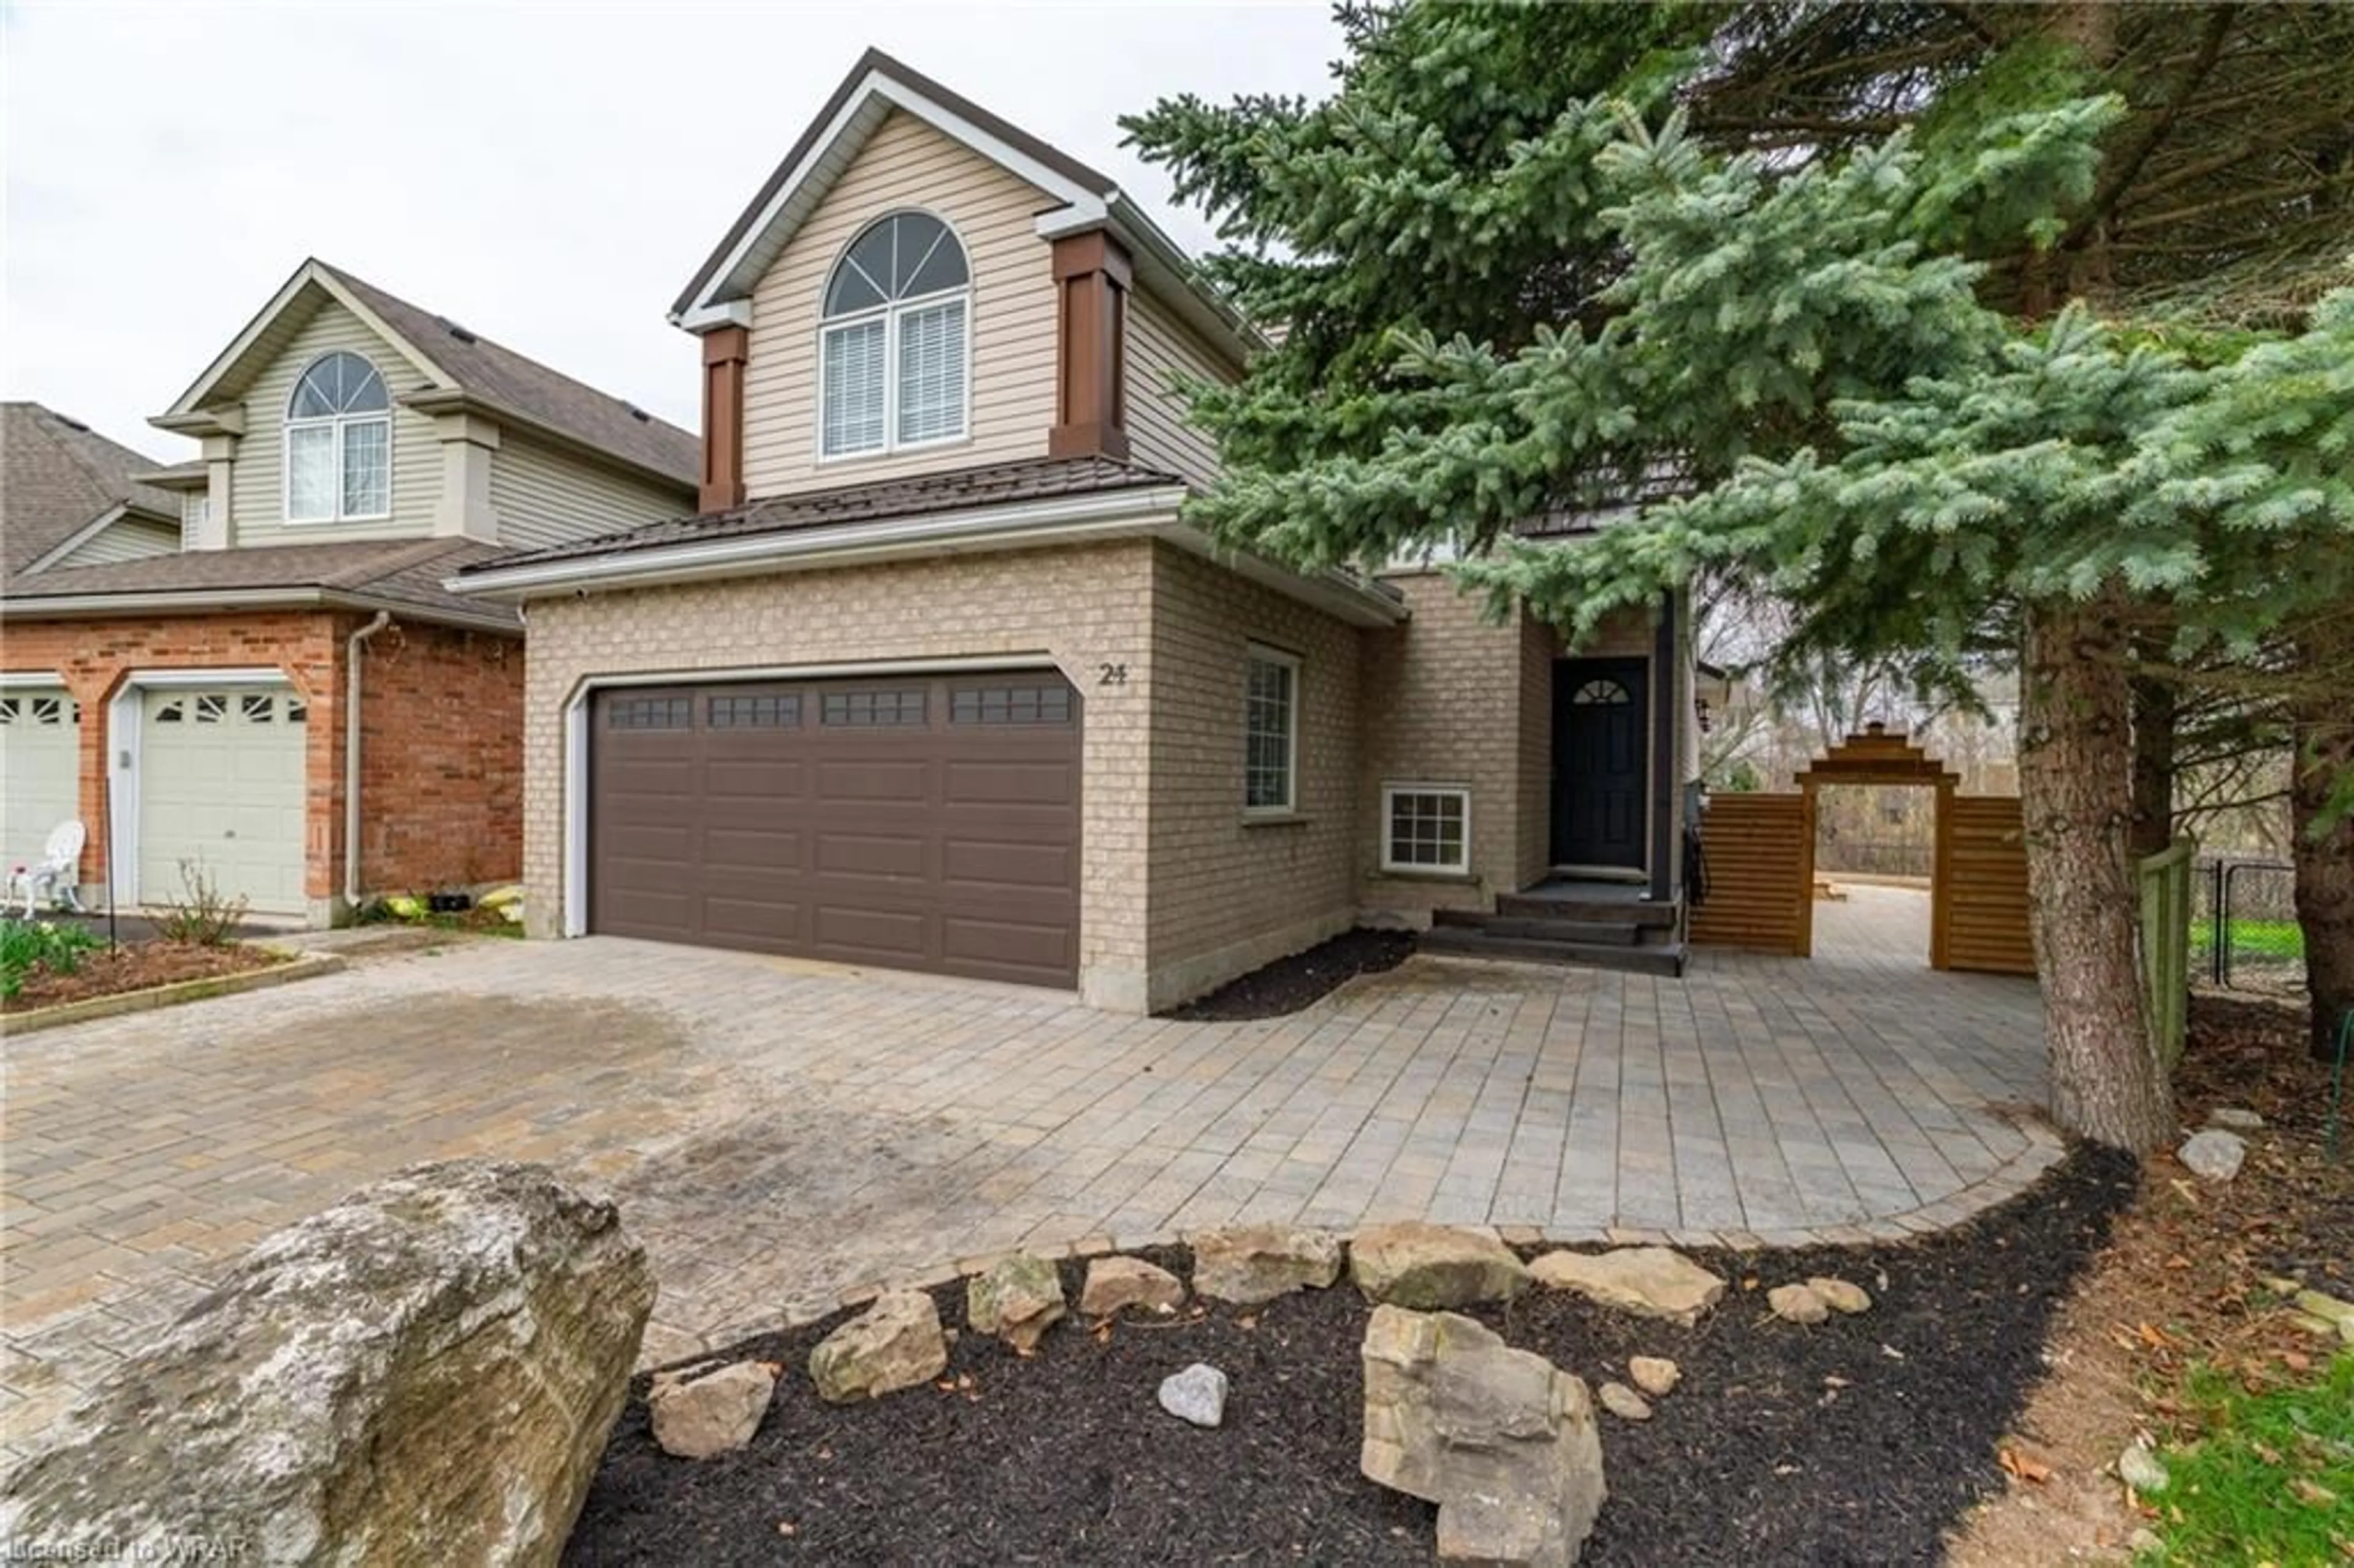 Home with brick exterior material for 24 Gaw Cres, Guelph Ontario N1L 1H8